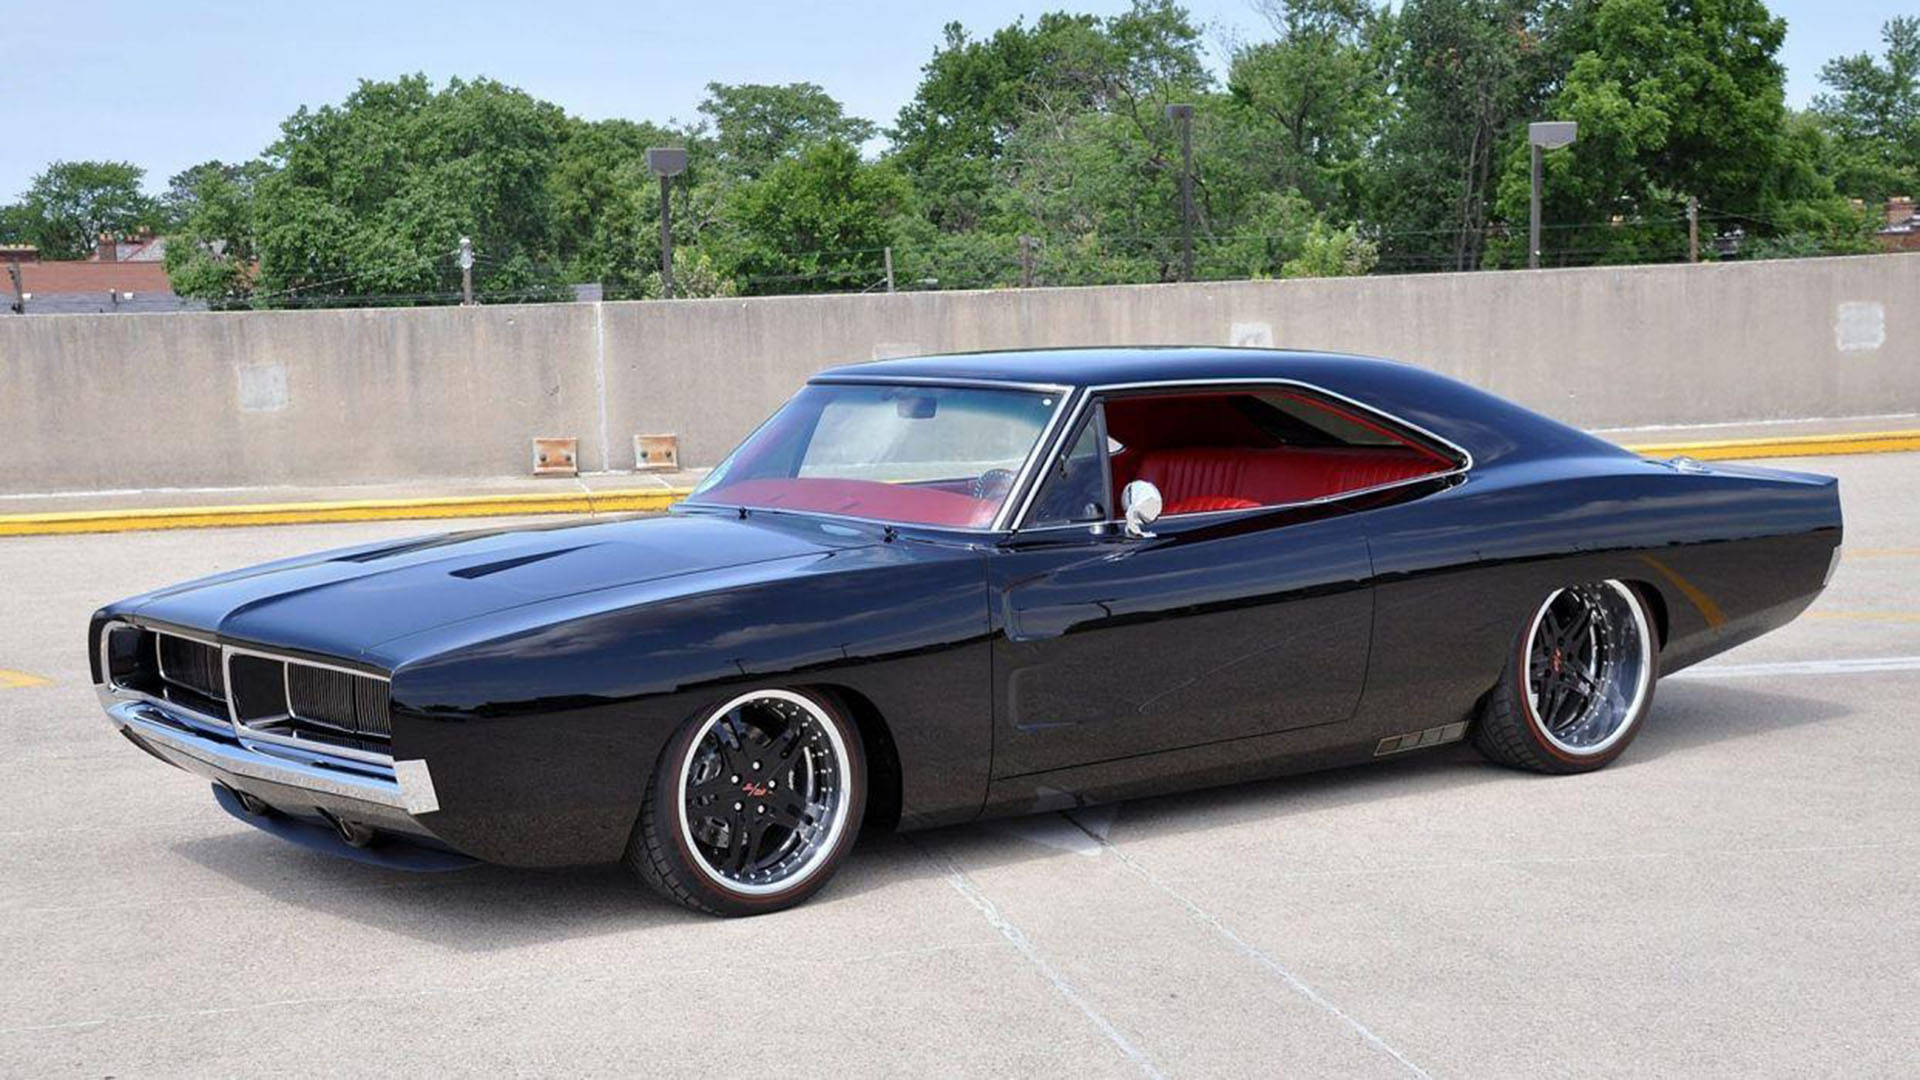 Iconic 1969 Dodge Charger Wallpaper